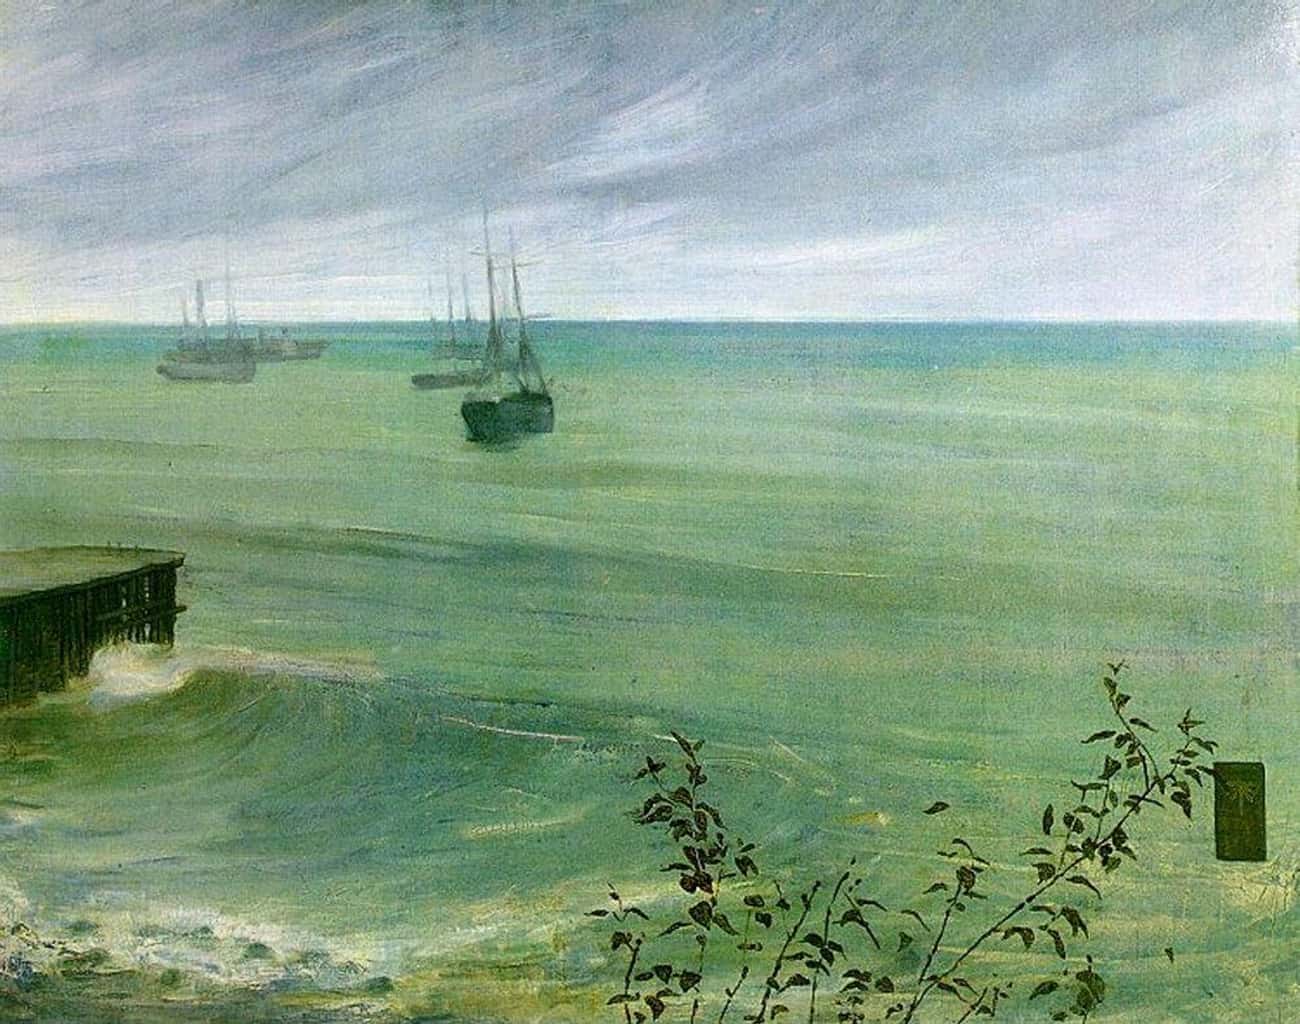 Symphony in Grey and Green: The Ocean